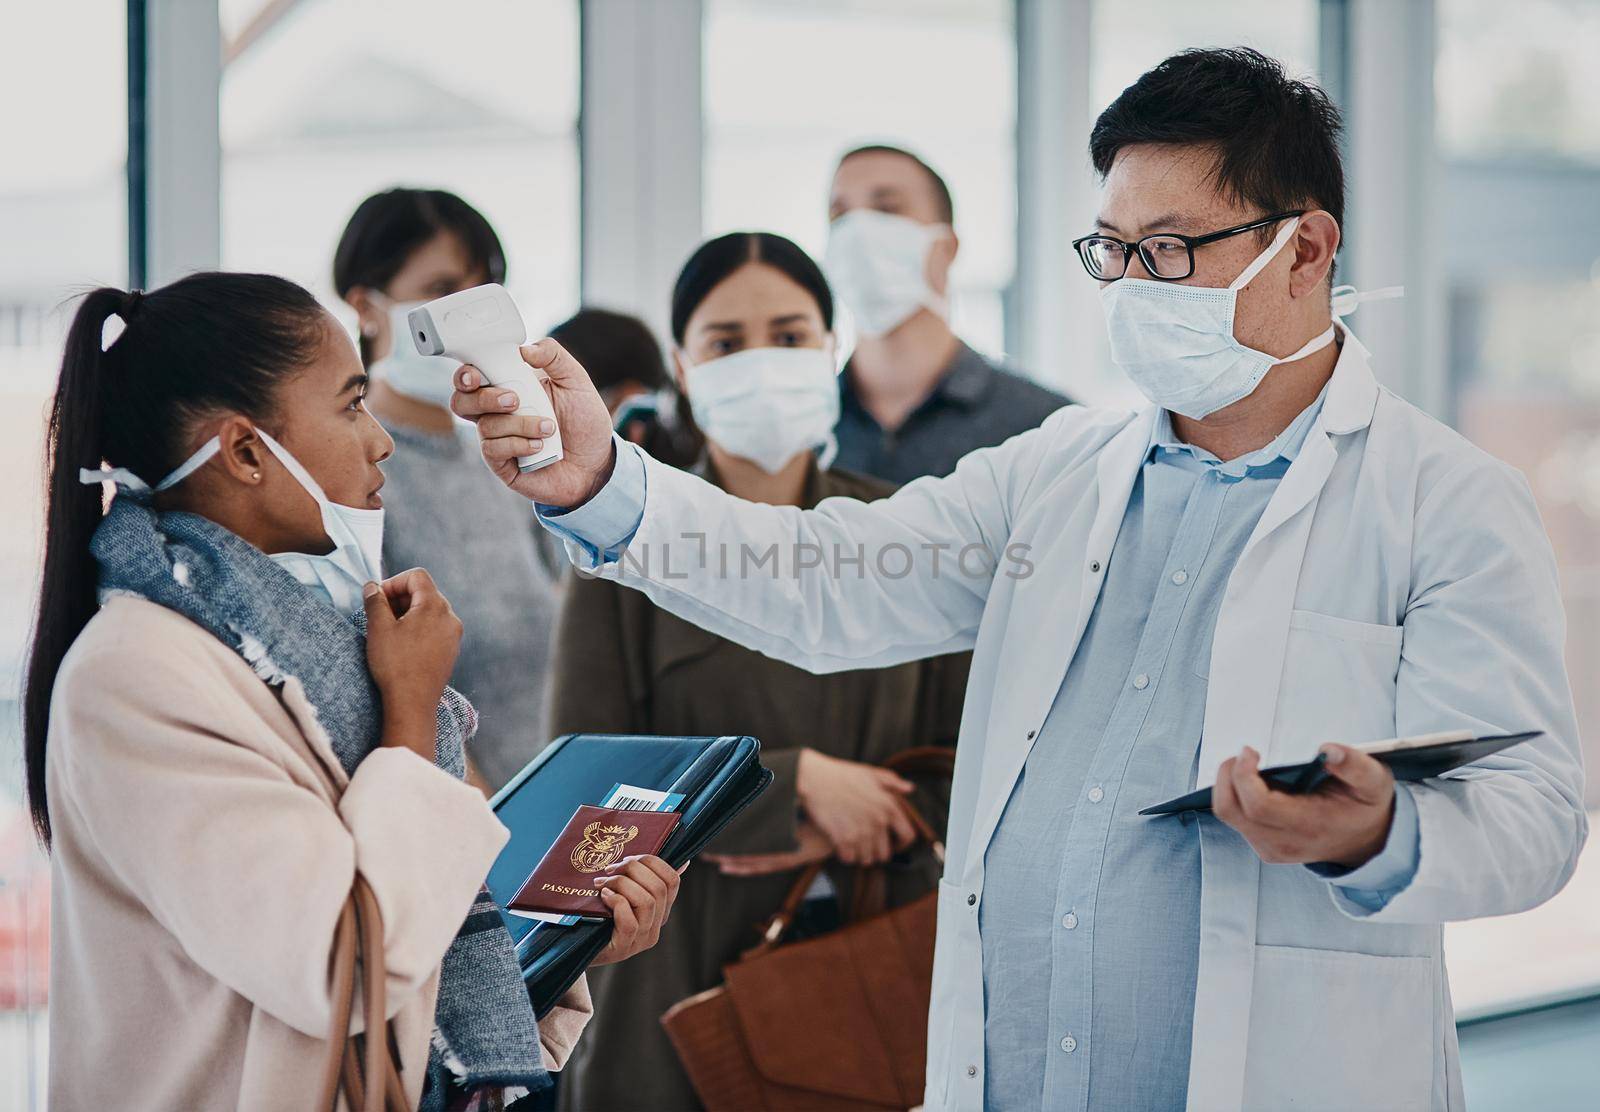 A travel healthcare worker testing covid temperature at the airport using an infrared thermometer. Medical professional doing a coronavirus check on a woman at an entrance to prevent the spread by YuriArcurs